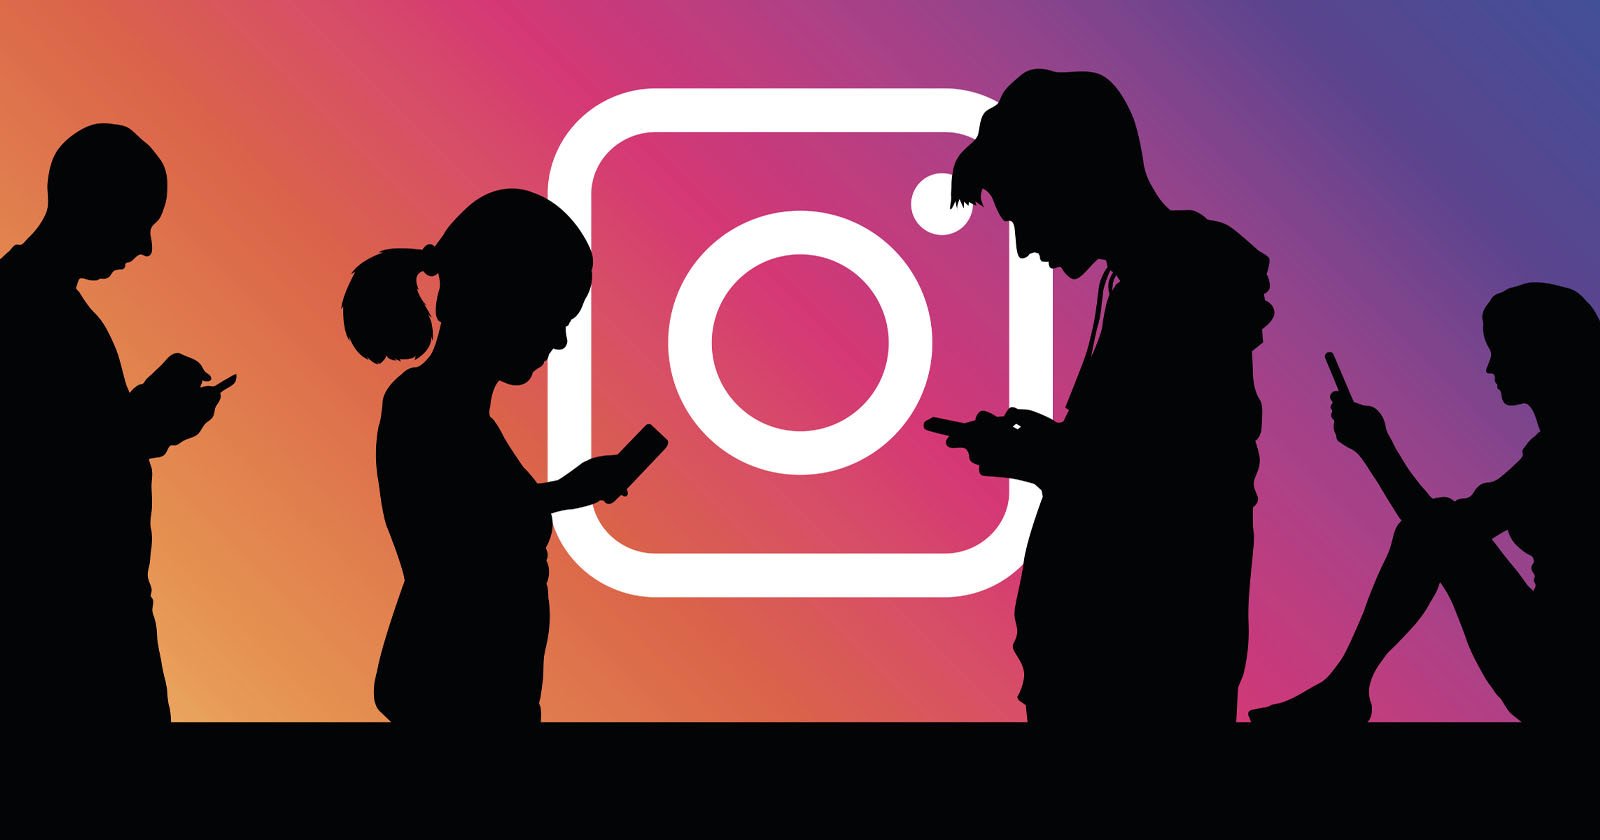 Instagram Ups Minimum Daily Use Time Limit, Encourages 3 Hours